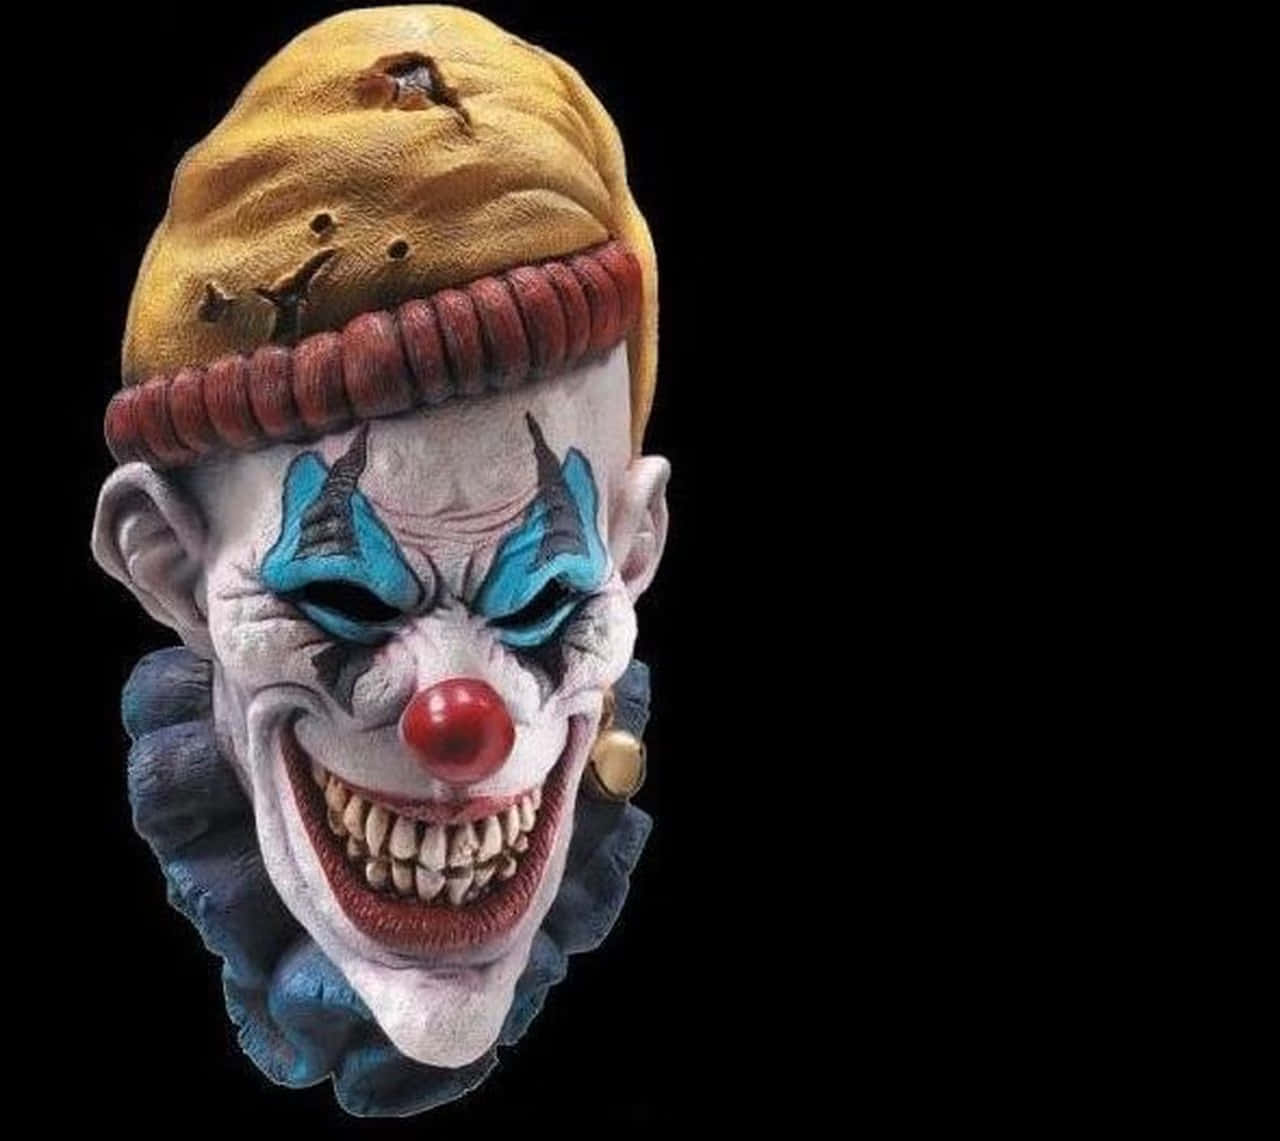 A Clown Mask With A Red Hat And Blue Eyes